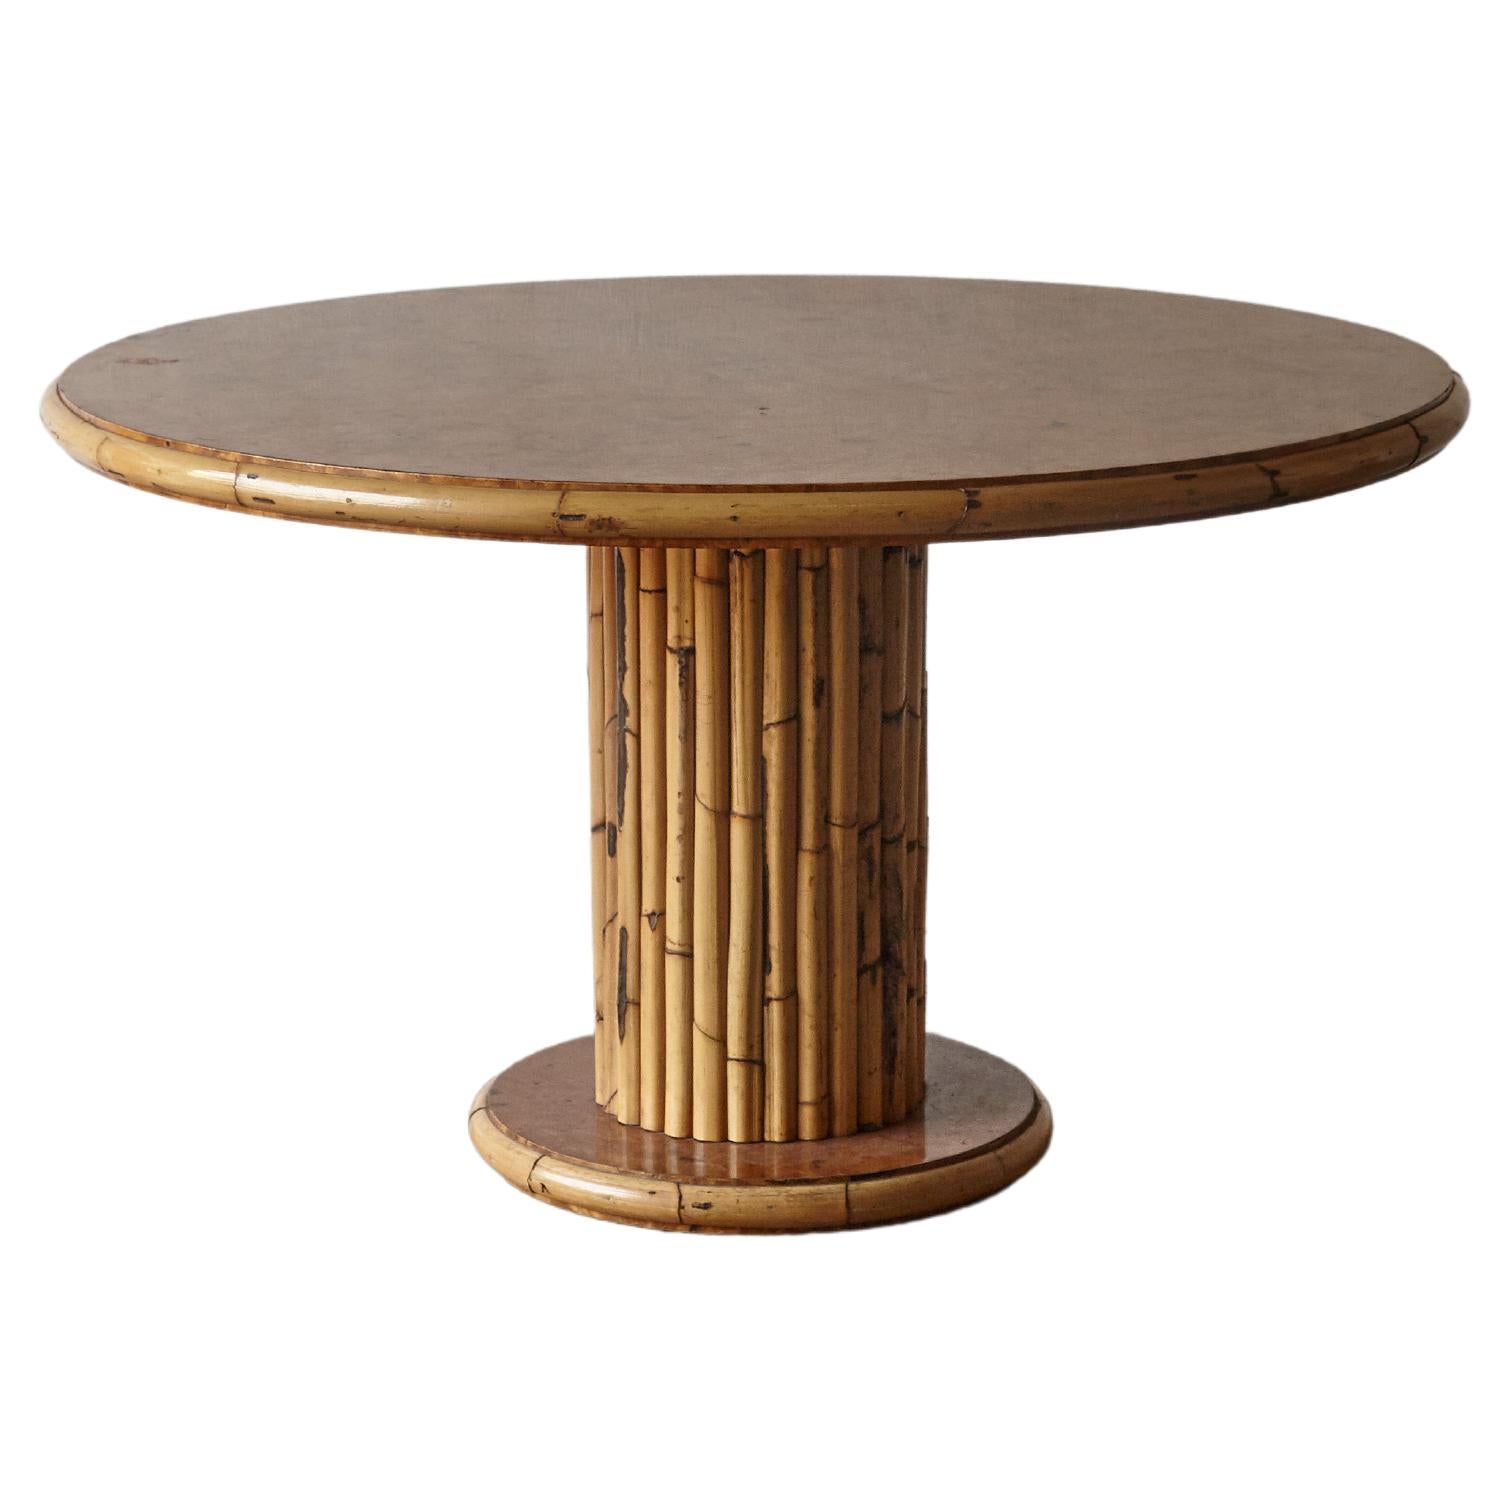 Round Bamboo and Burl Wood Dining Table, Italy, 1970s